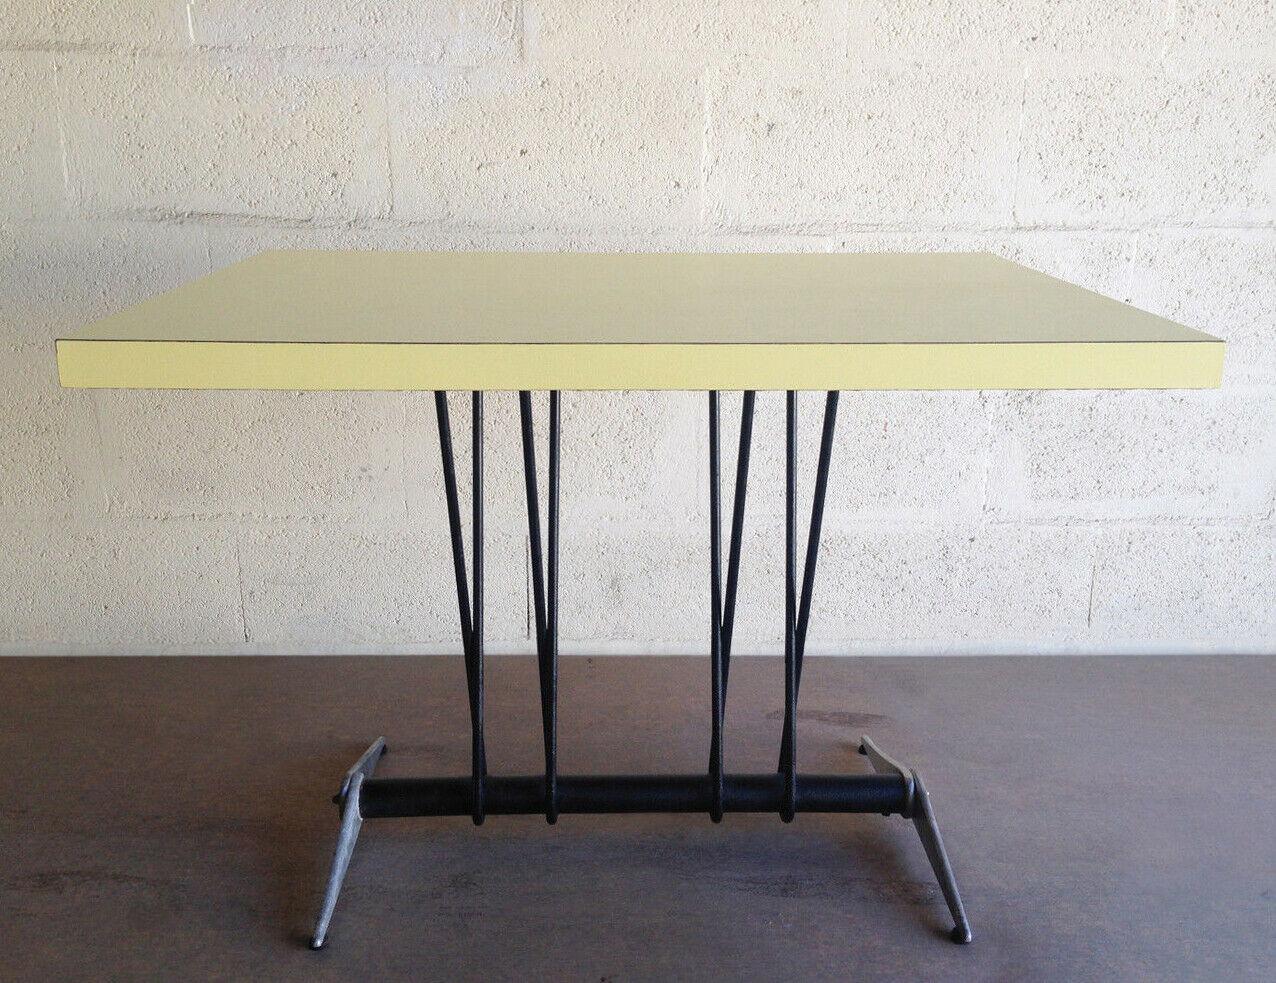 Jean Prouvé
Rectangular table for the Aero Club of Doncourt-les Conflans
yellow melamine wood on black lacquered curved metal base on a double winged base in chromed aluminium fibre,
circa 1938
H 72 x L 100 x W 69
Rare and historic
3,900 Euros.